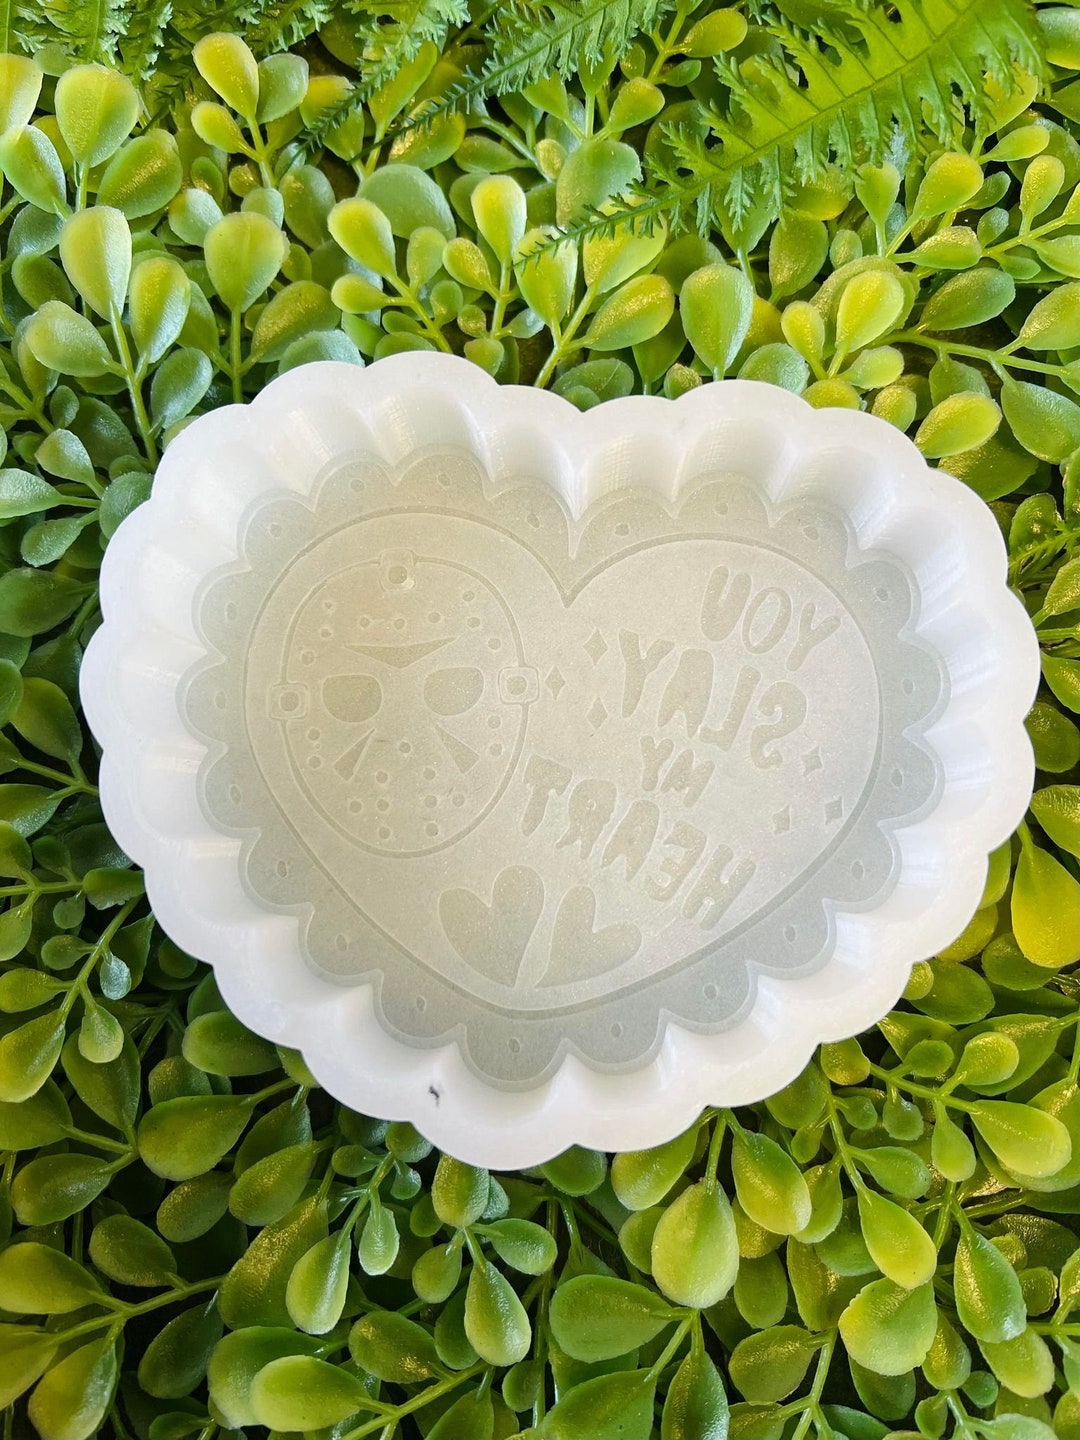 Candy Hearts / Valentines / Silicone Freshie Mold / Freshie Mold / Mold / Silicone  Mold / Molds for Freshies / Aroma Bead Molds 